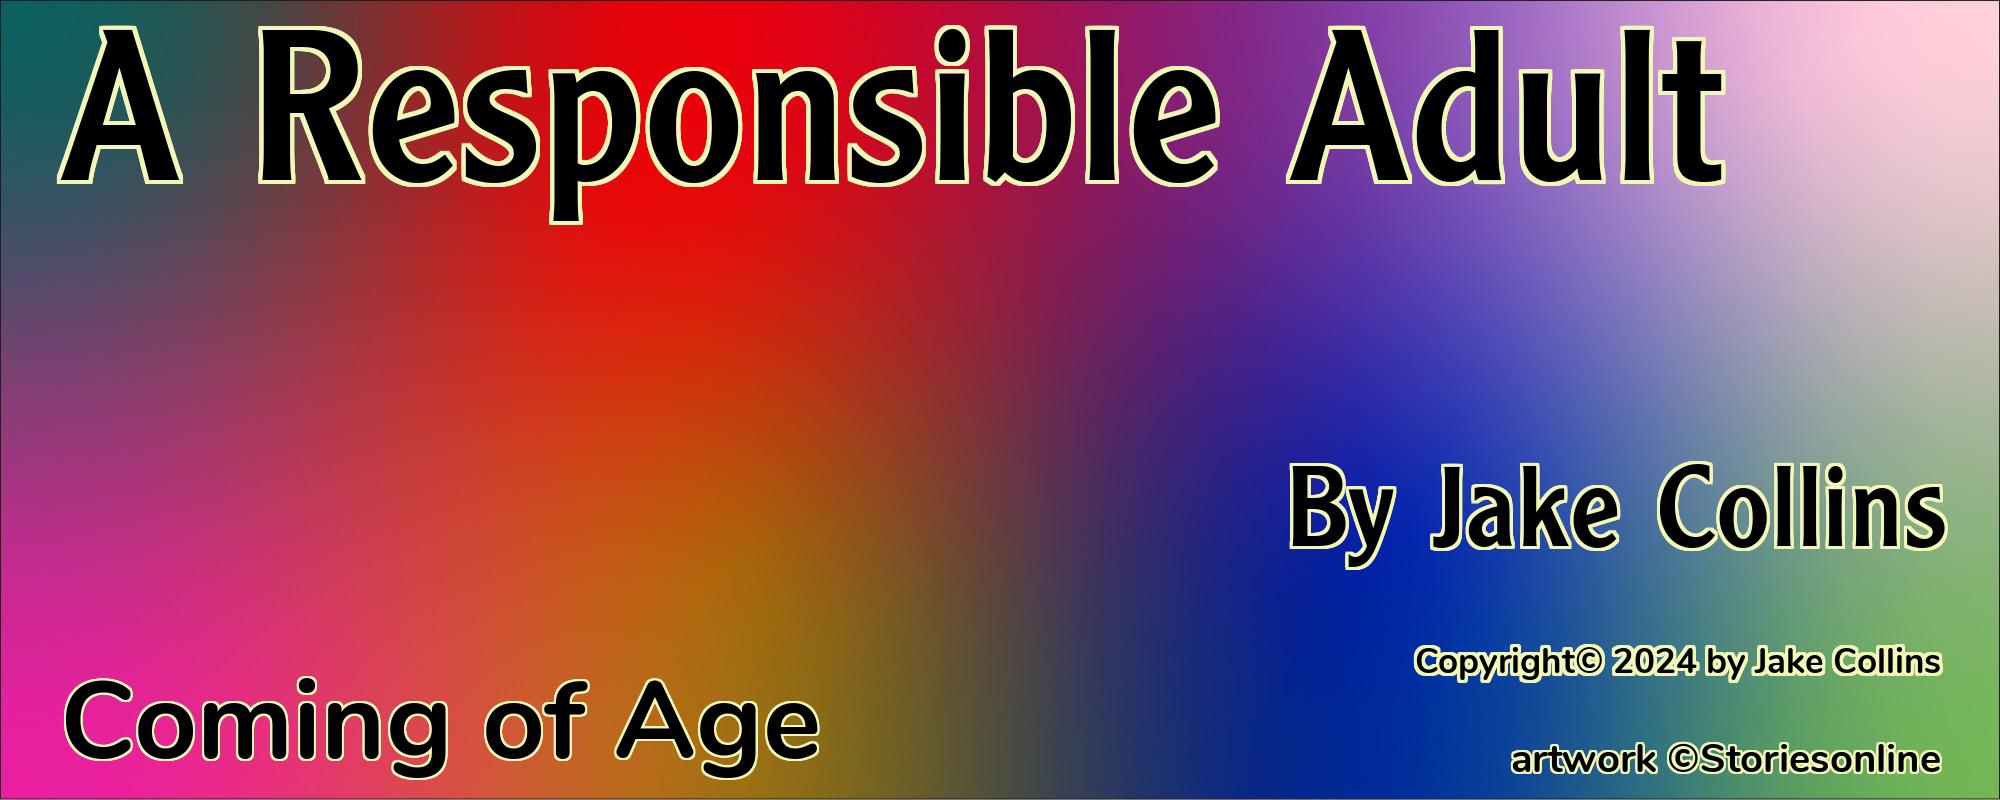 A Responsible Adult - Cover